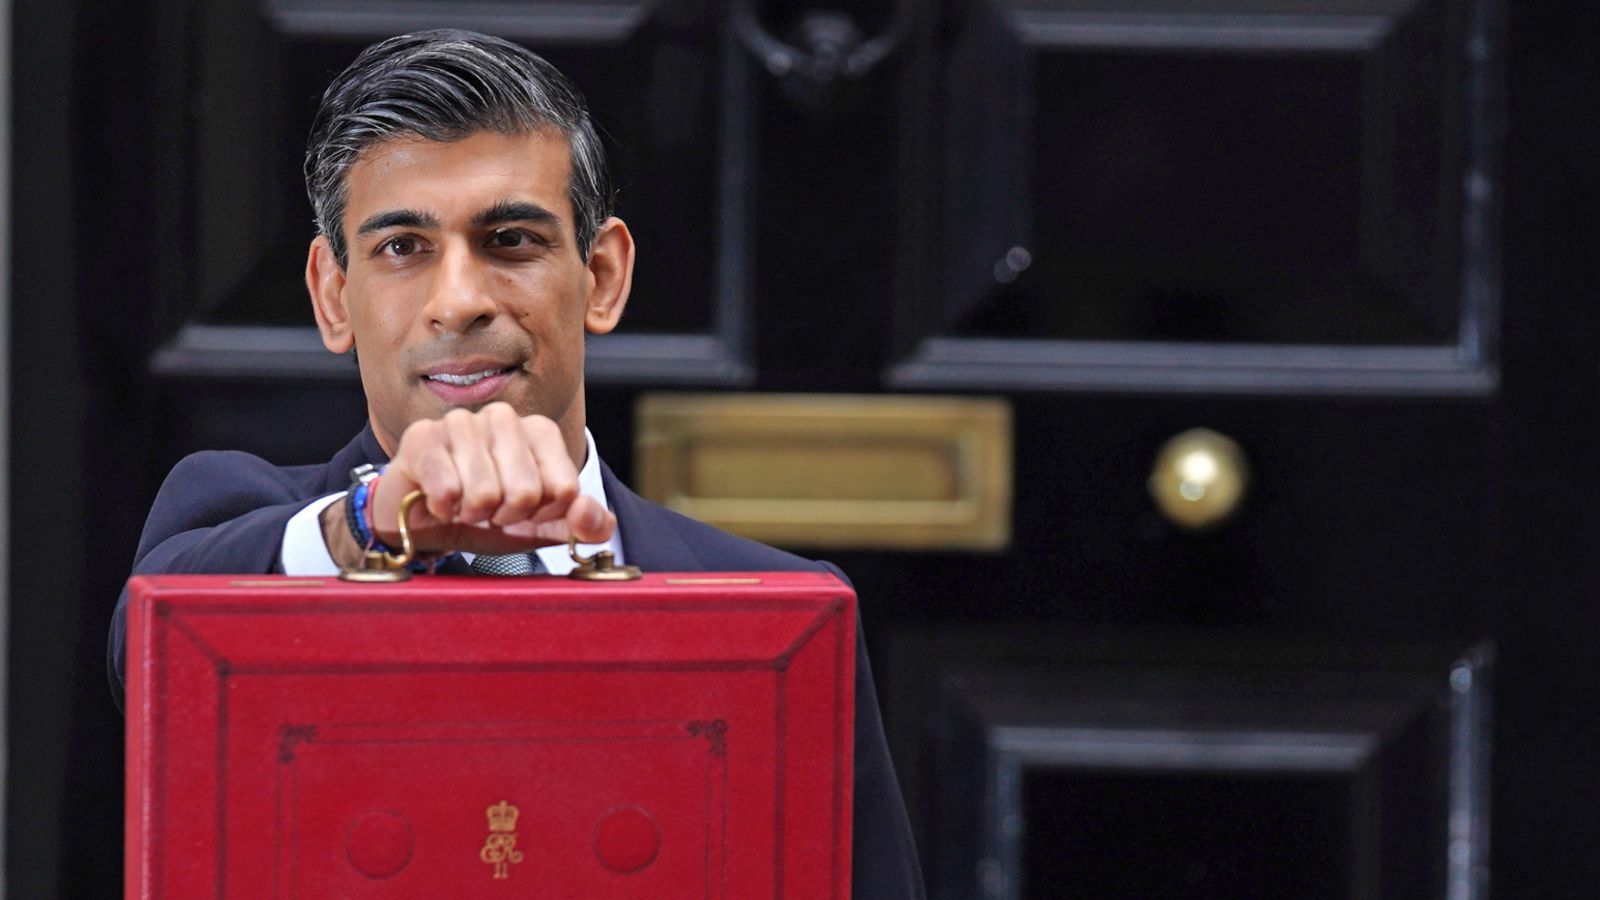 Budget 2021: Chancellor Rishi Sunak denies raising taxes to cut them before next election to win votes - but says reducing burden is 'goal'